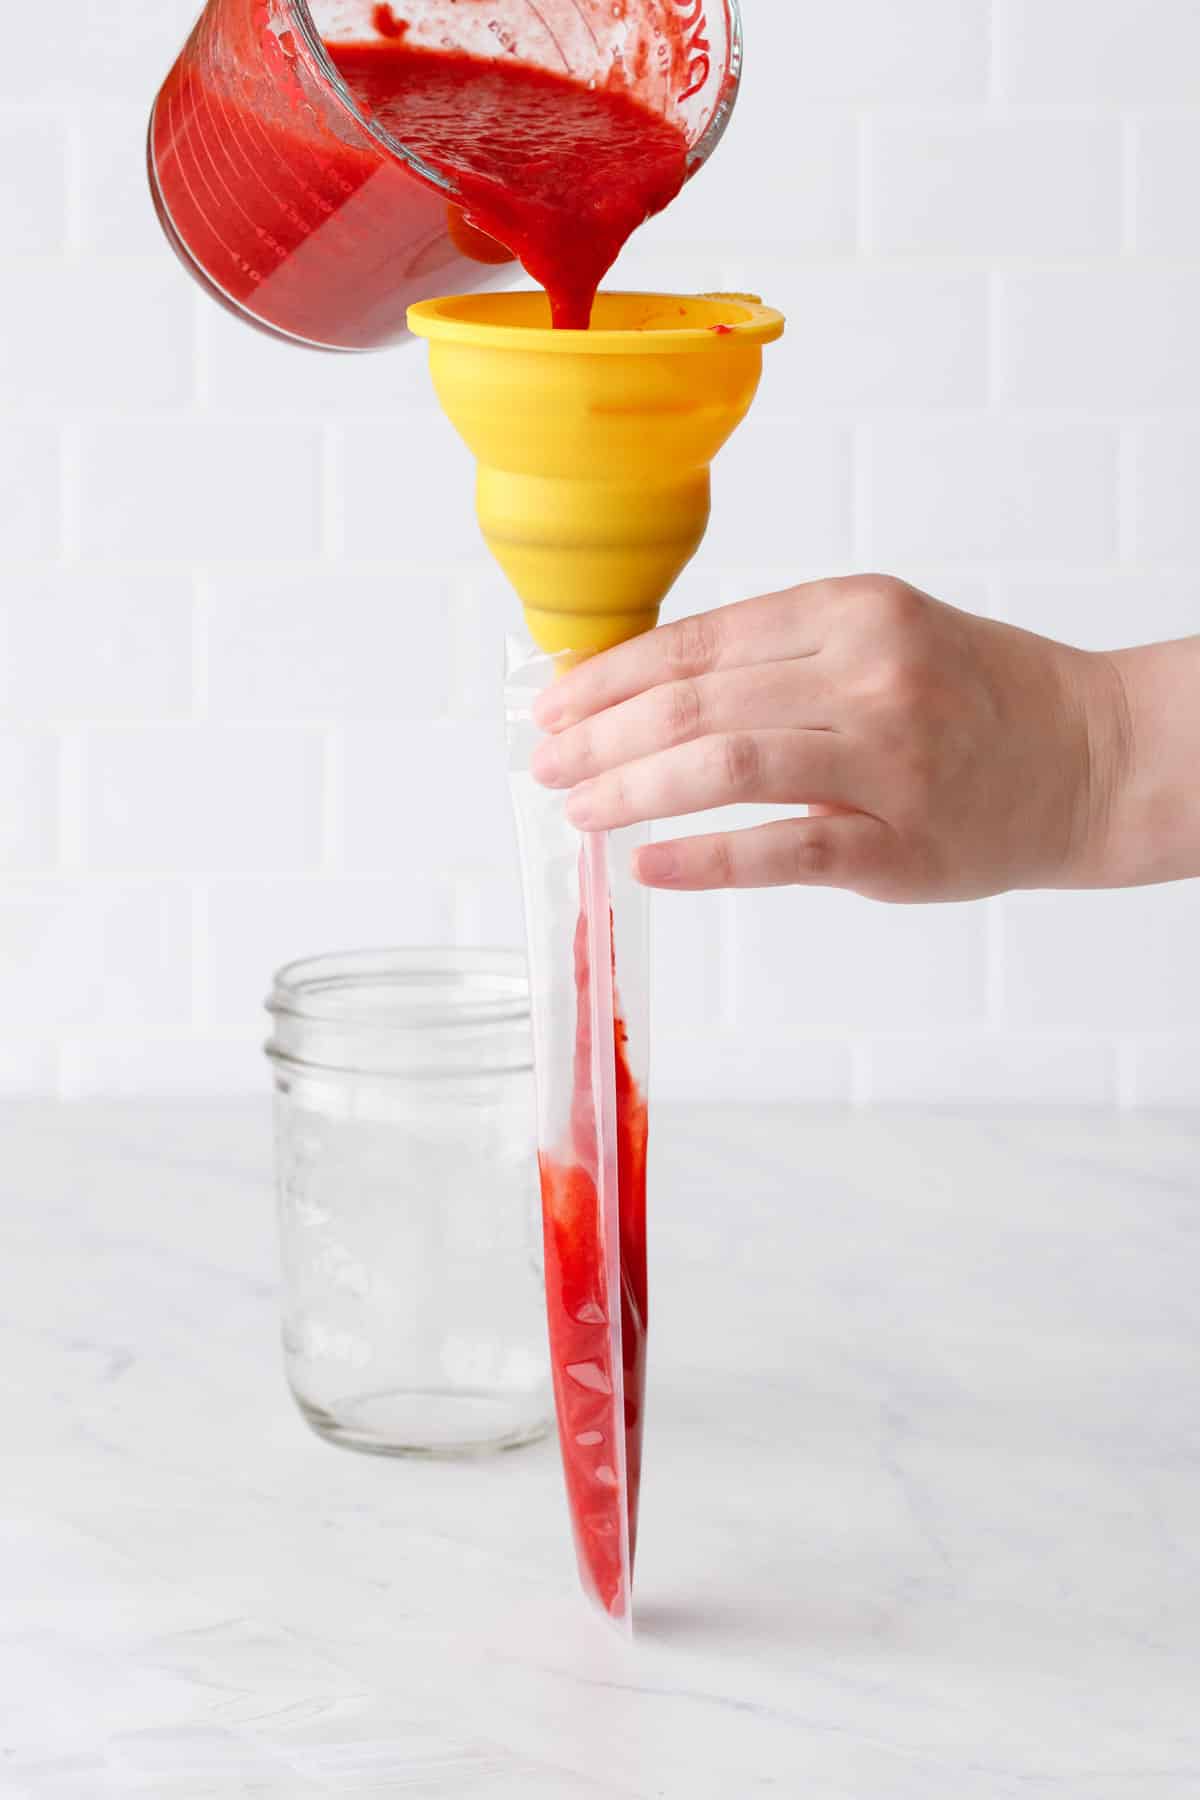 Filling the plastic ice pop pouch using a silicone funnel to fill with strawberry freezer jam.